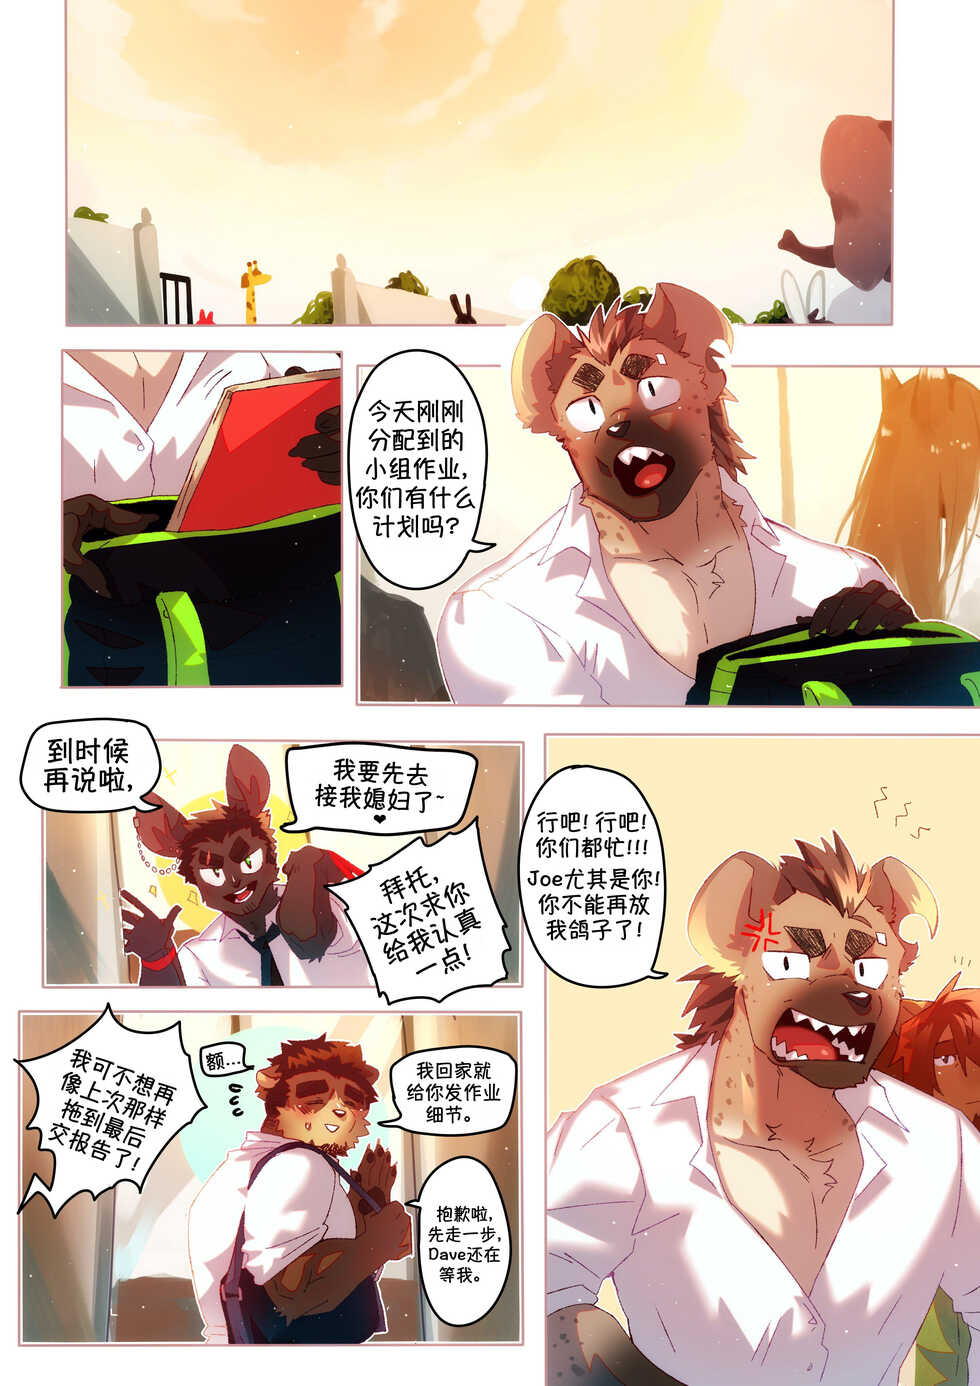 [BooBoo] Passionate Affection 深挚 [Chinese Ver.]  Ongoing - Page 11